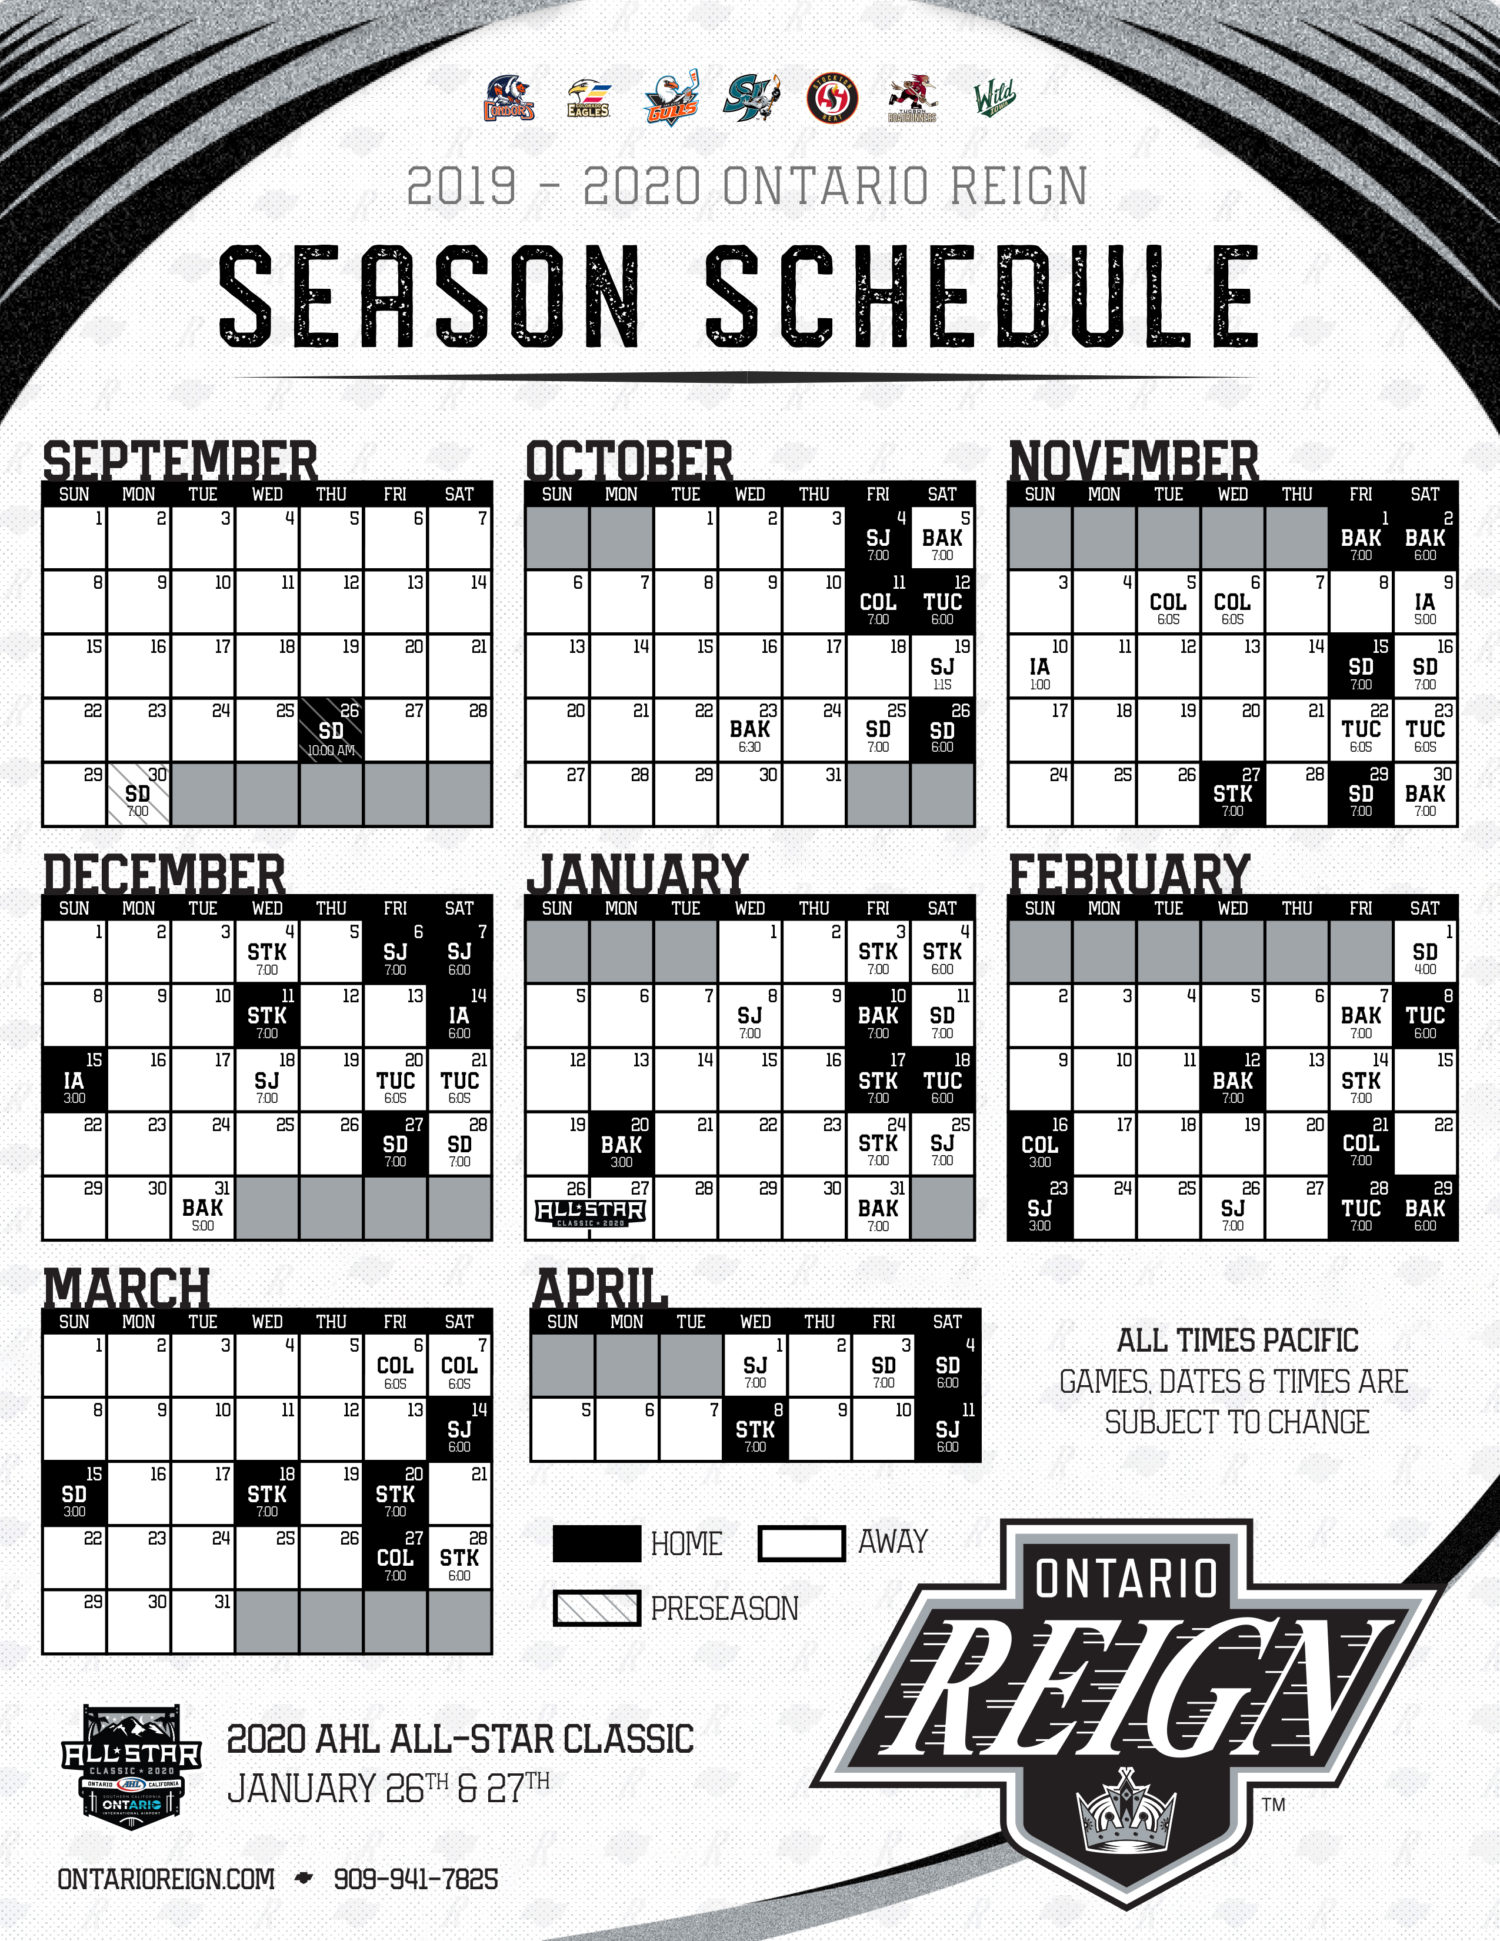 The 2019-20 Ontario Reign schedule: Facts, Stats, Tidbits and other